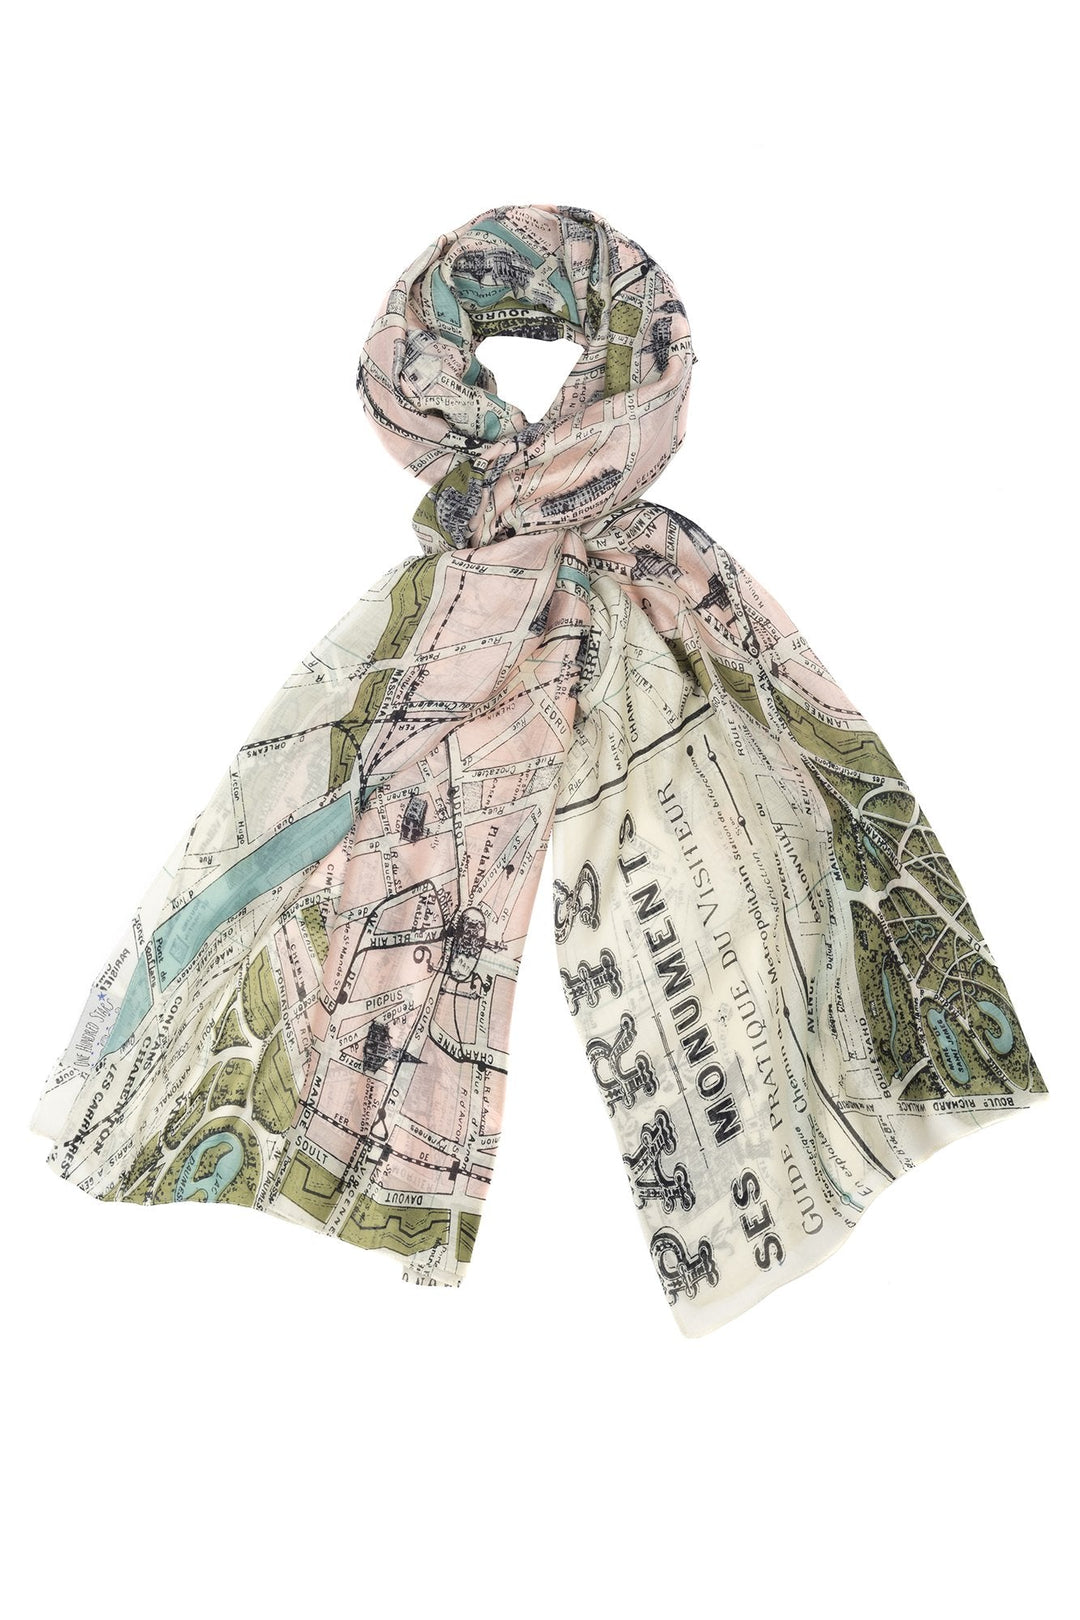 One Hundred Stars Paris Map Scarf- Our scarves are a full 100cm x 200cm making them perfect for layering in the winter months or worn as a delicate cover up during the summer seasons.